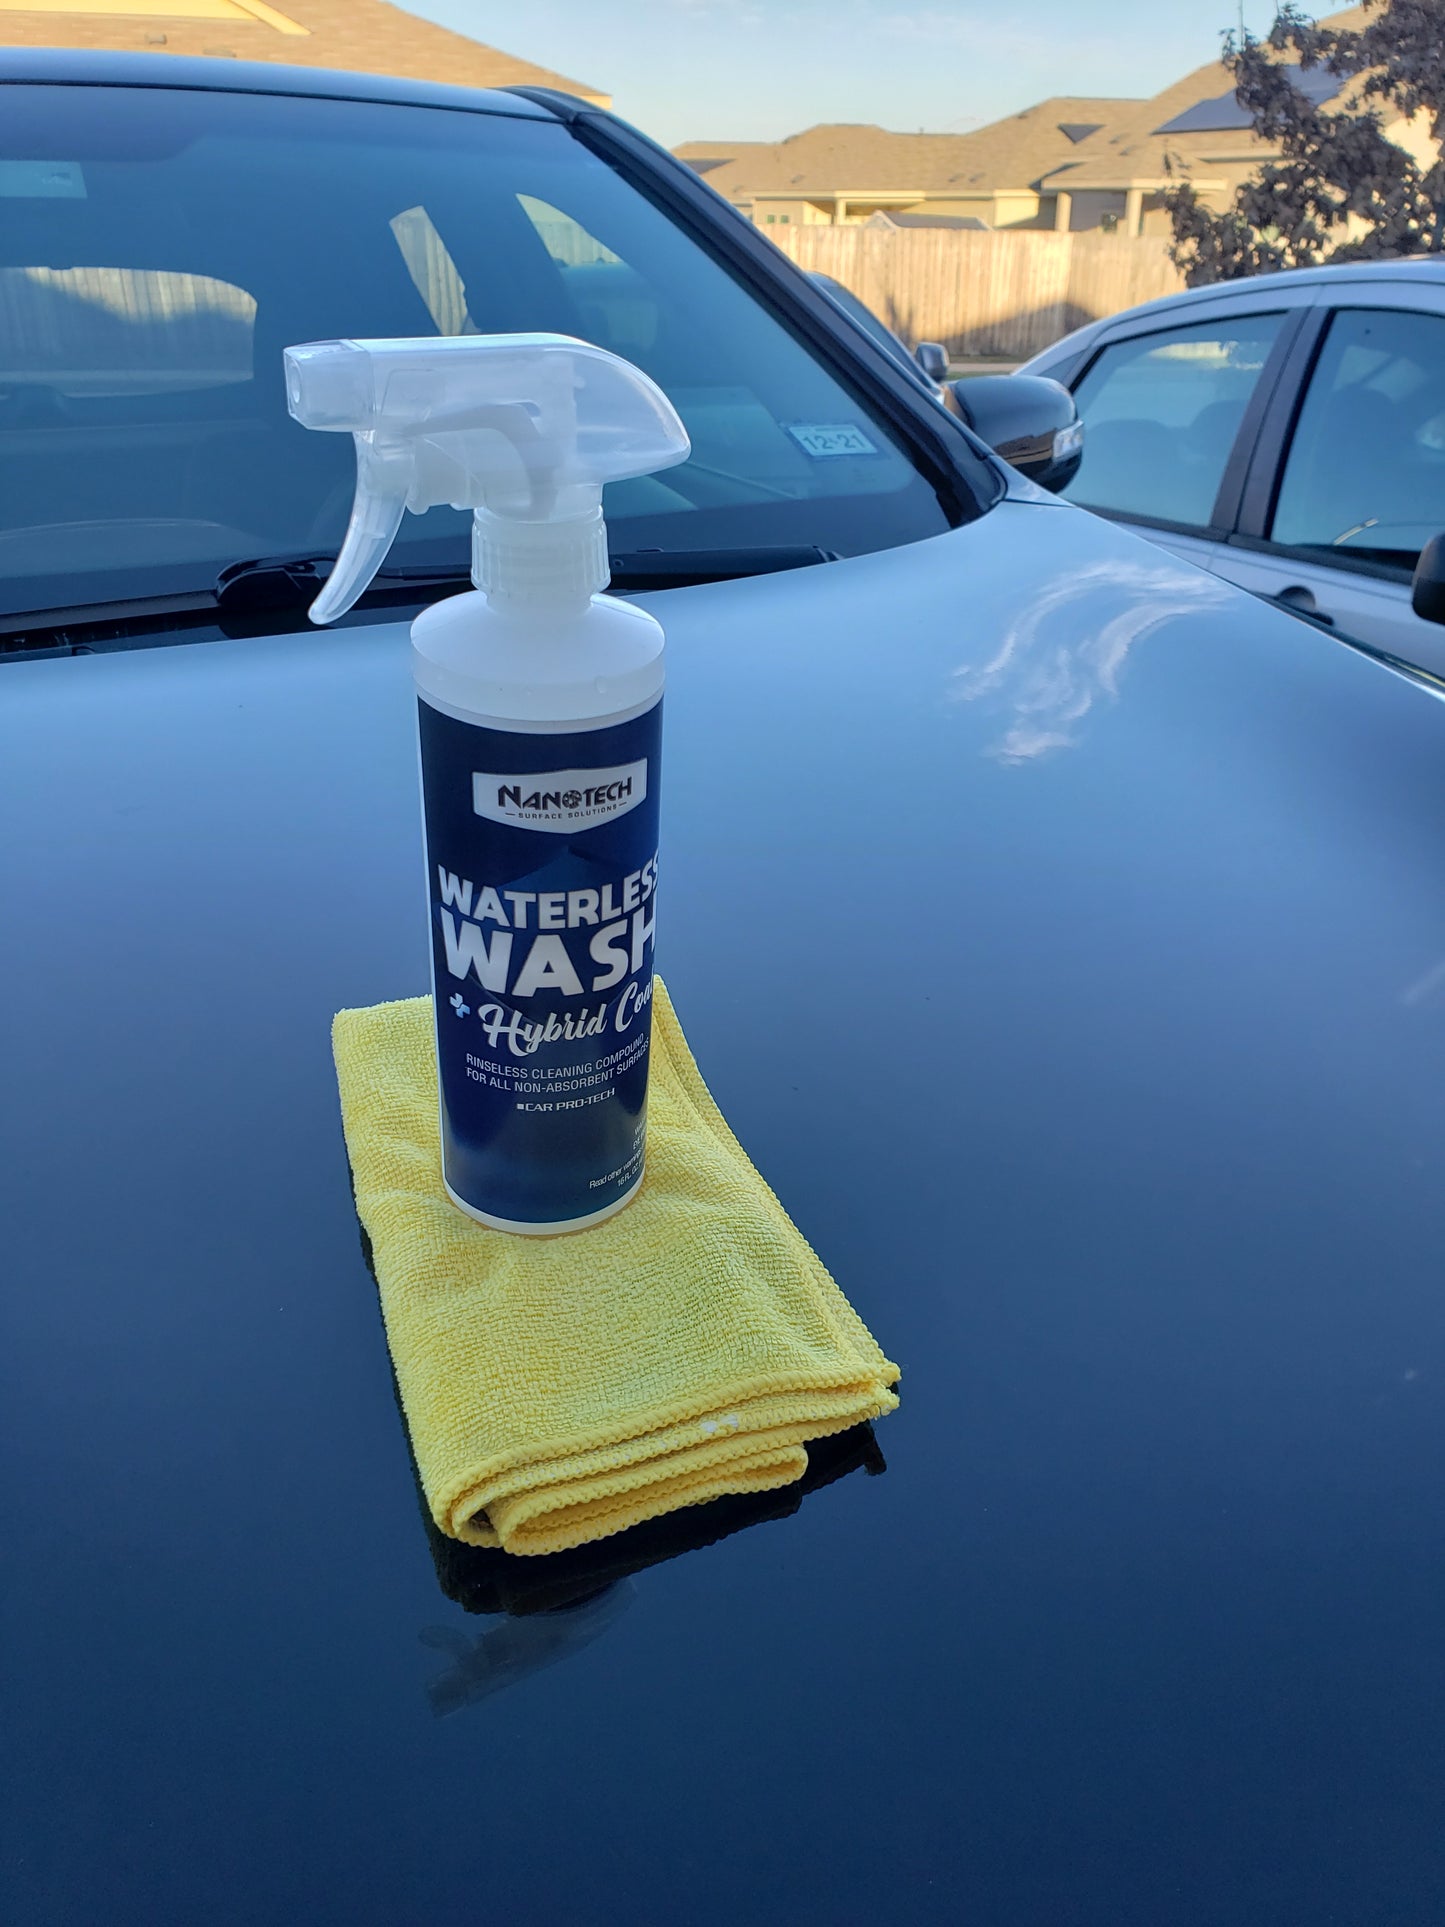 Automotive cleaning samples